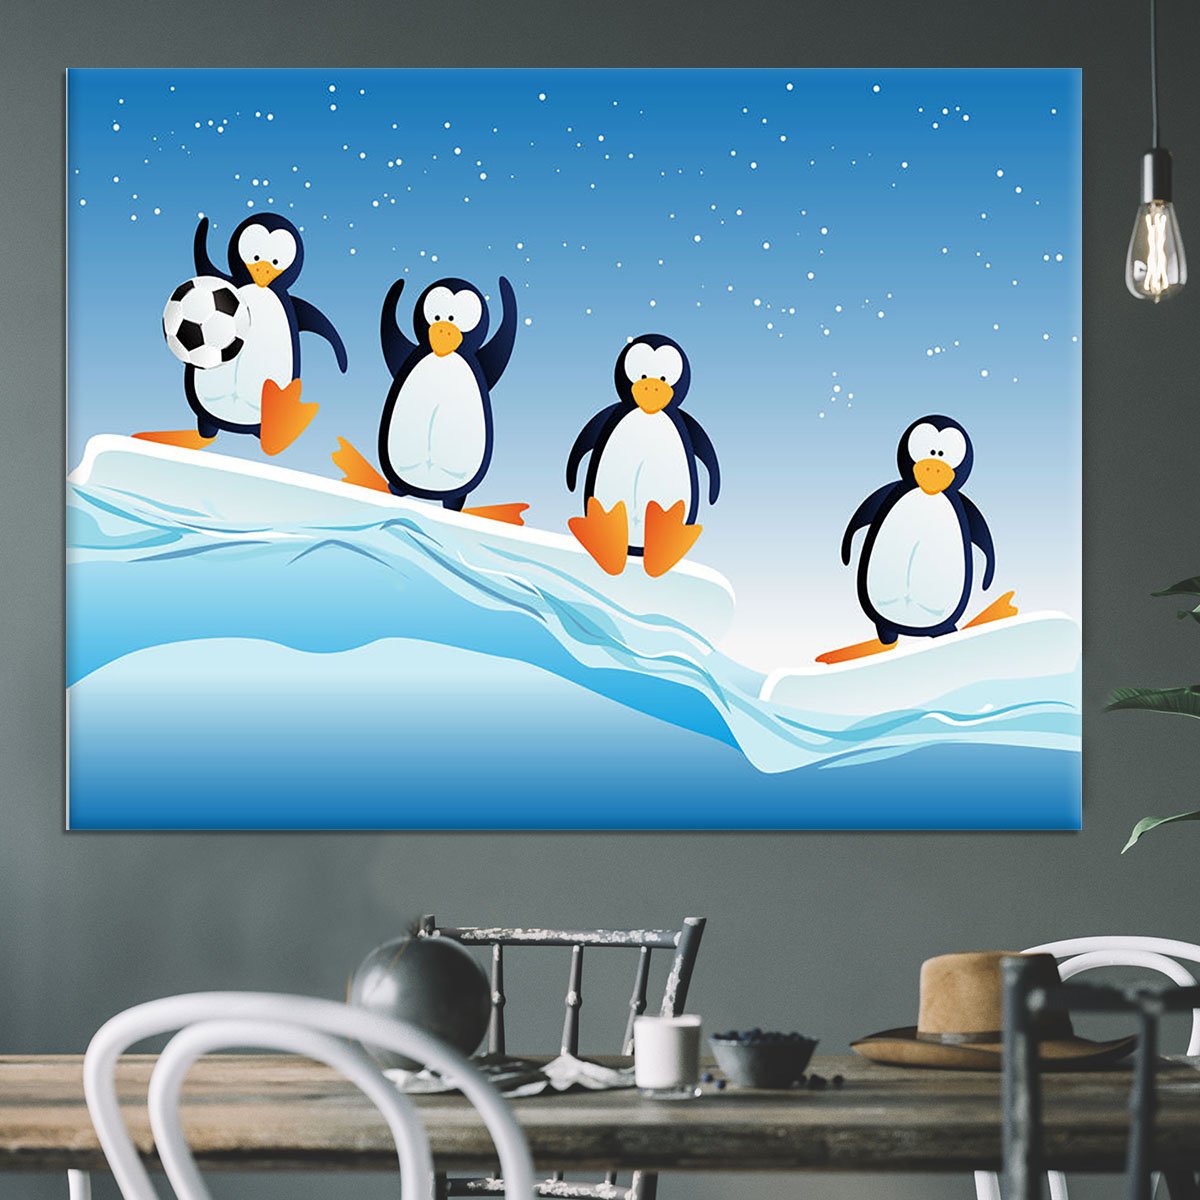 Cartoonstyle illustration of penguins Canvas Print or Poster